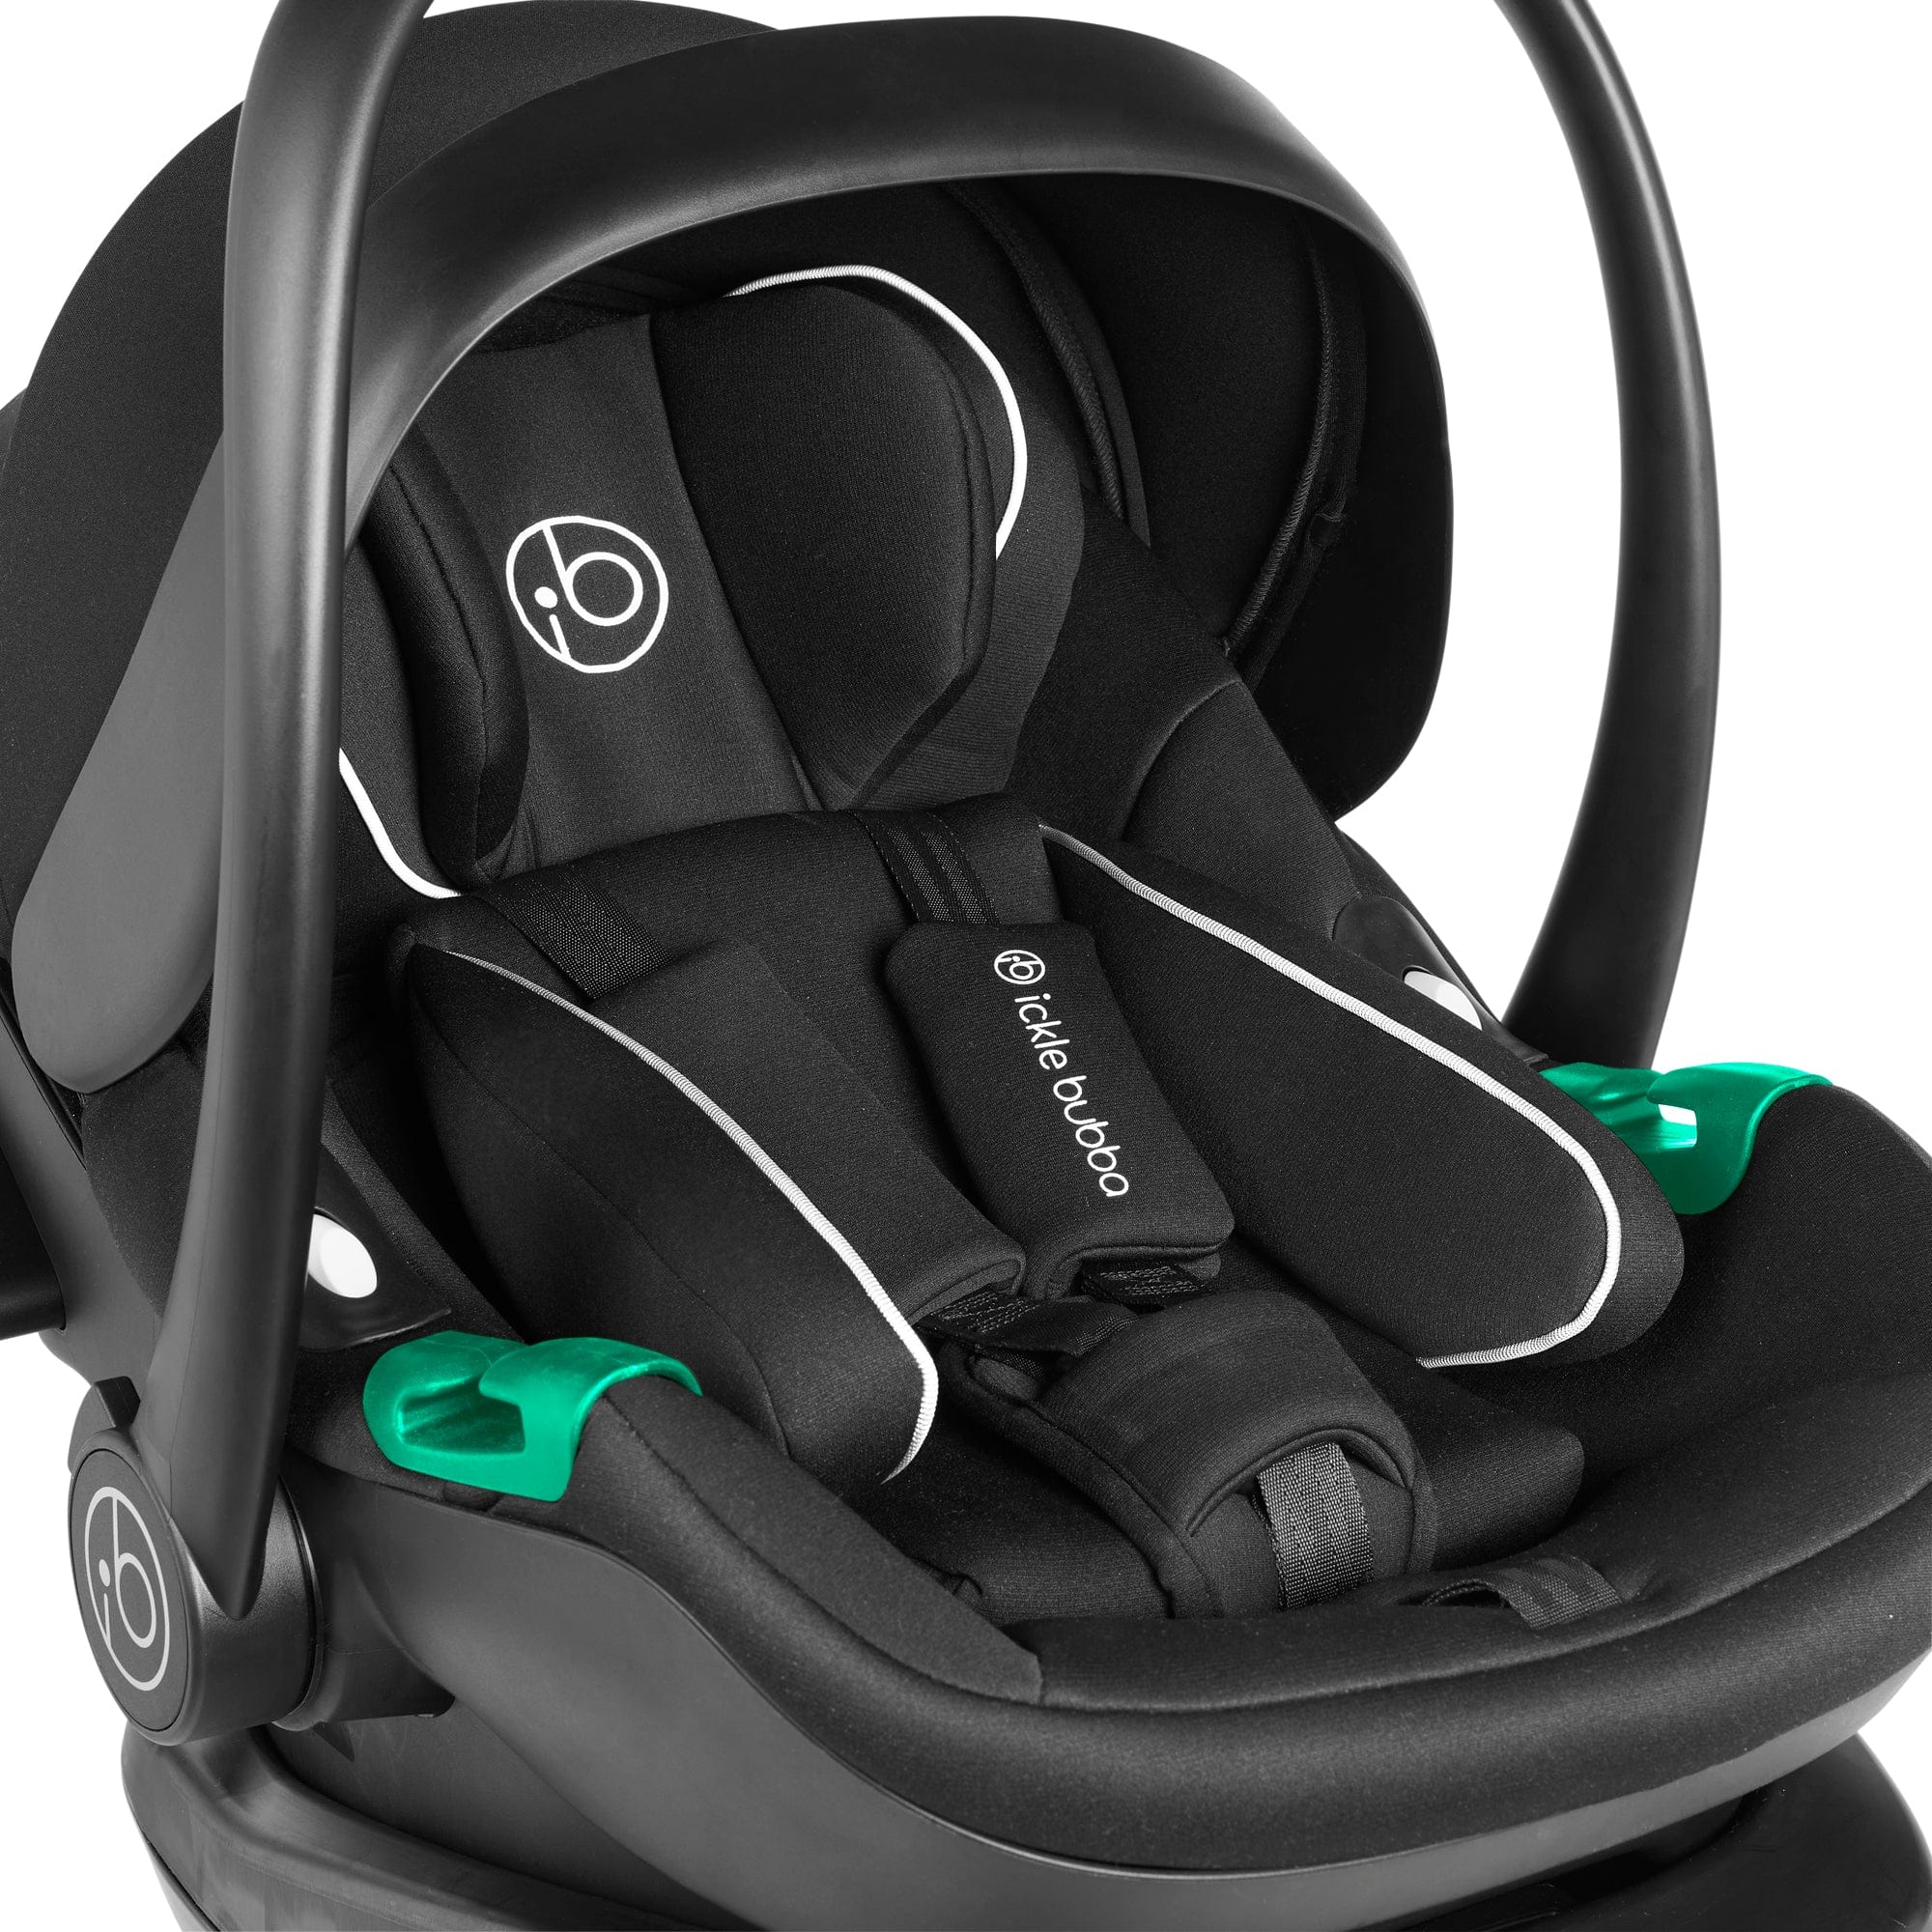 Ickle Bubba Venus Max Jogger Stroller I-Size Travel System in Black/Black with Isofix Base 3 Wheelers 13-004-500-001 5056515033632